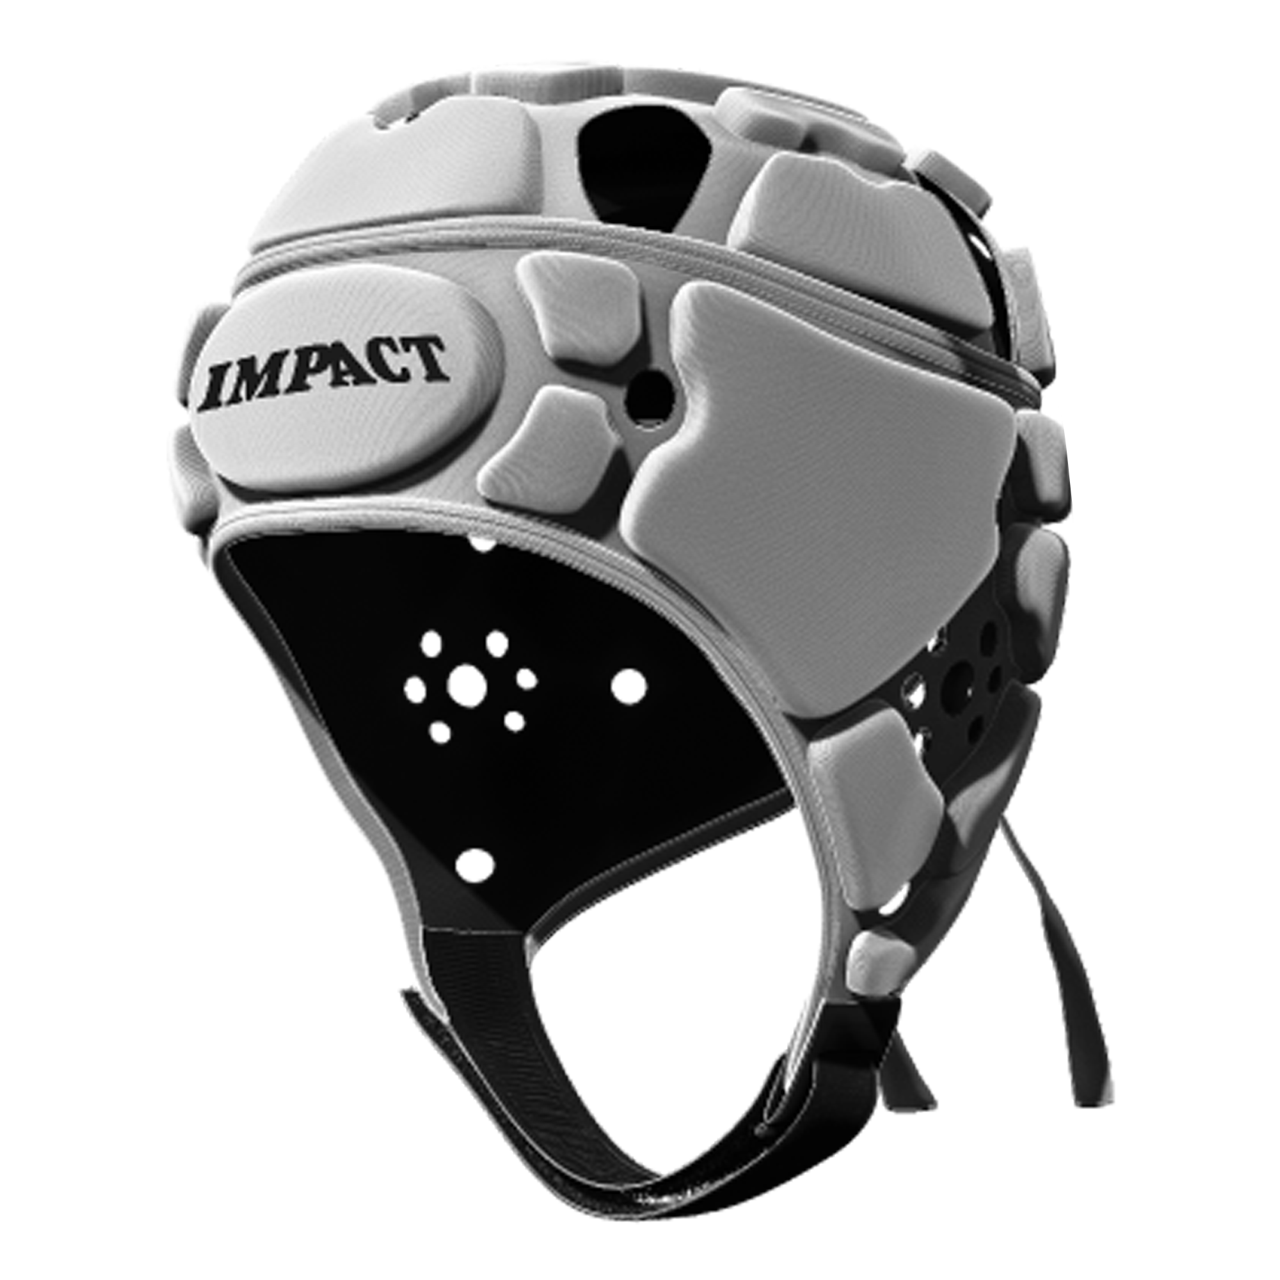 Casque rugby Canterbury Raze - Casques - Protections - Equipements